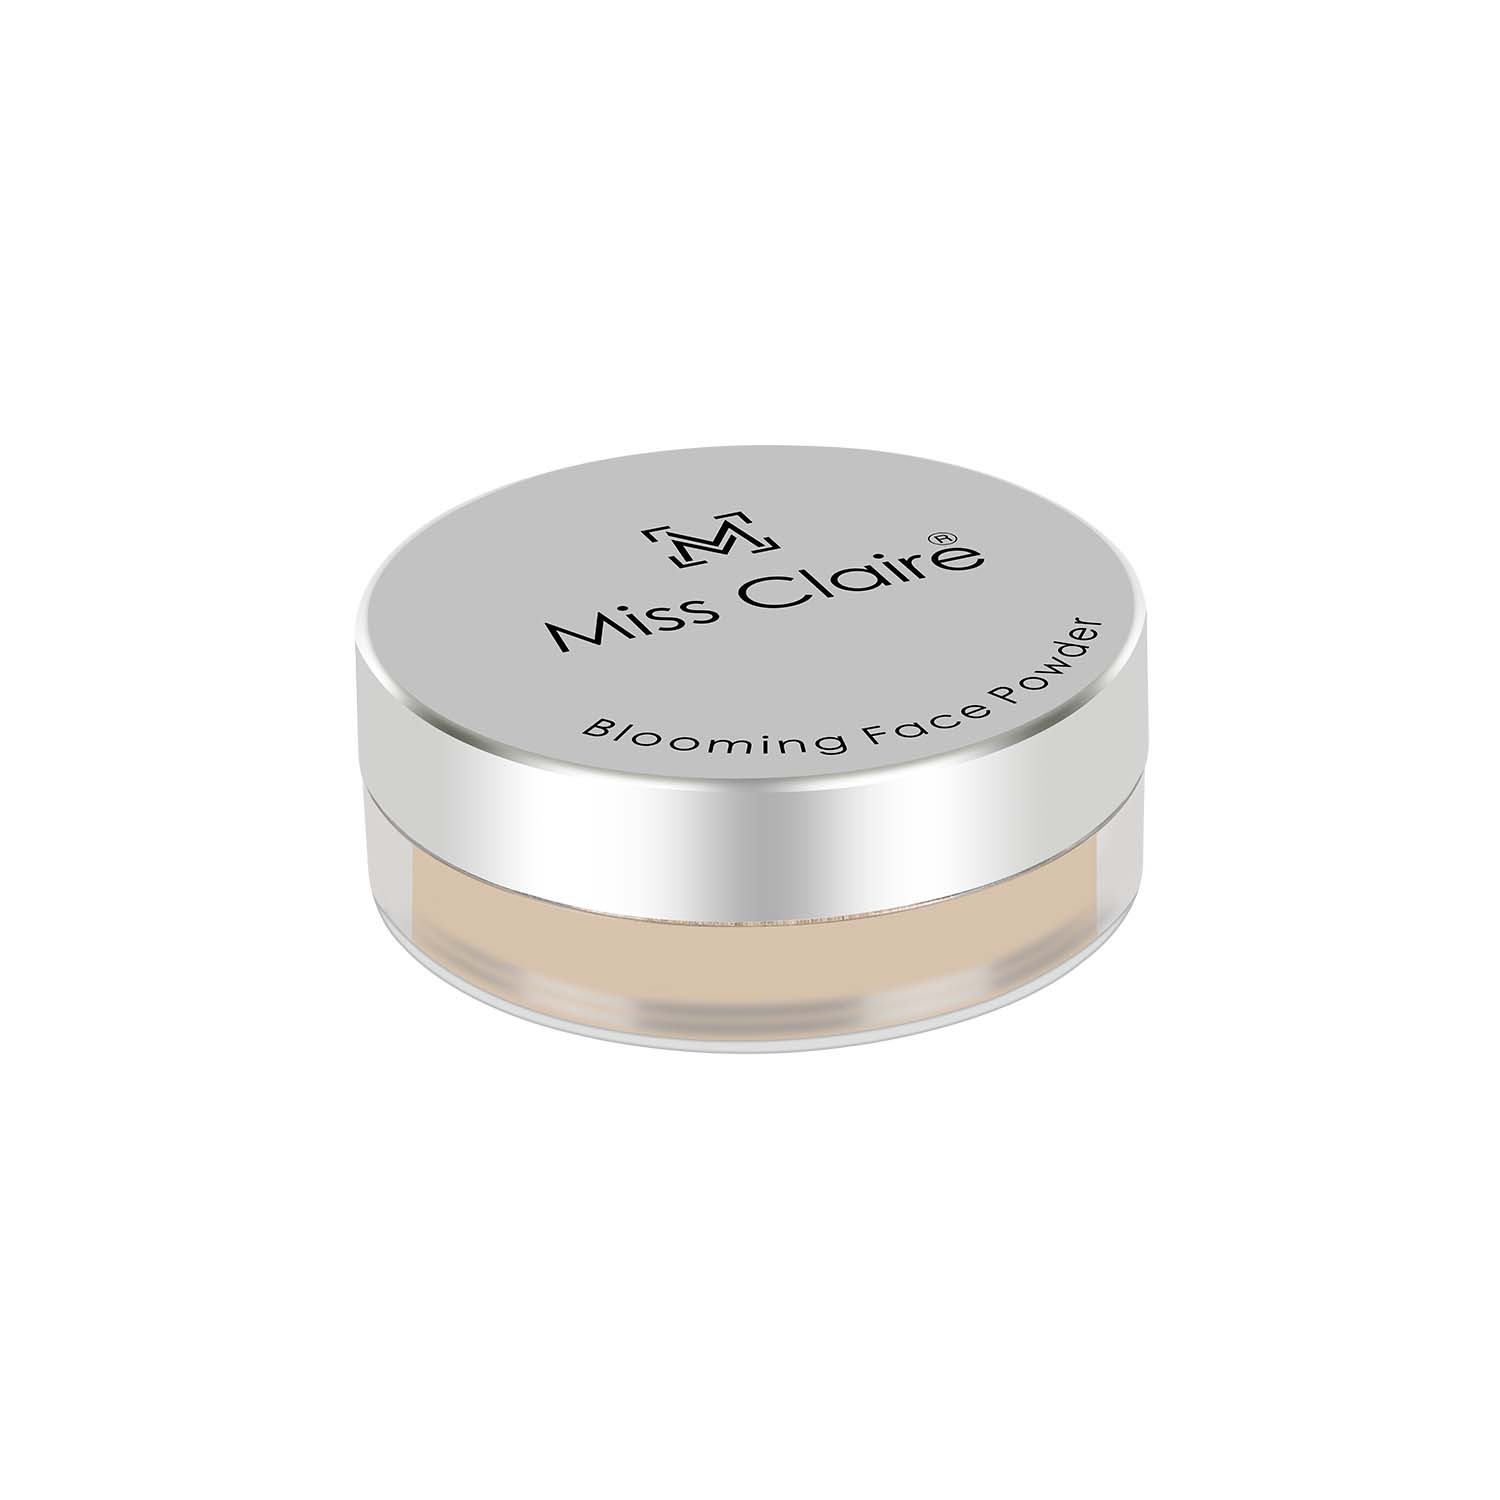 Miss Claire | Miss Claire Blooming Face Loose Powder - 02 Translucent (7g)